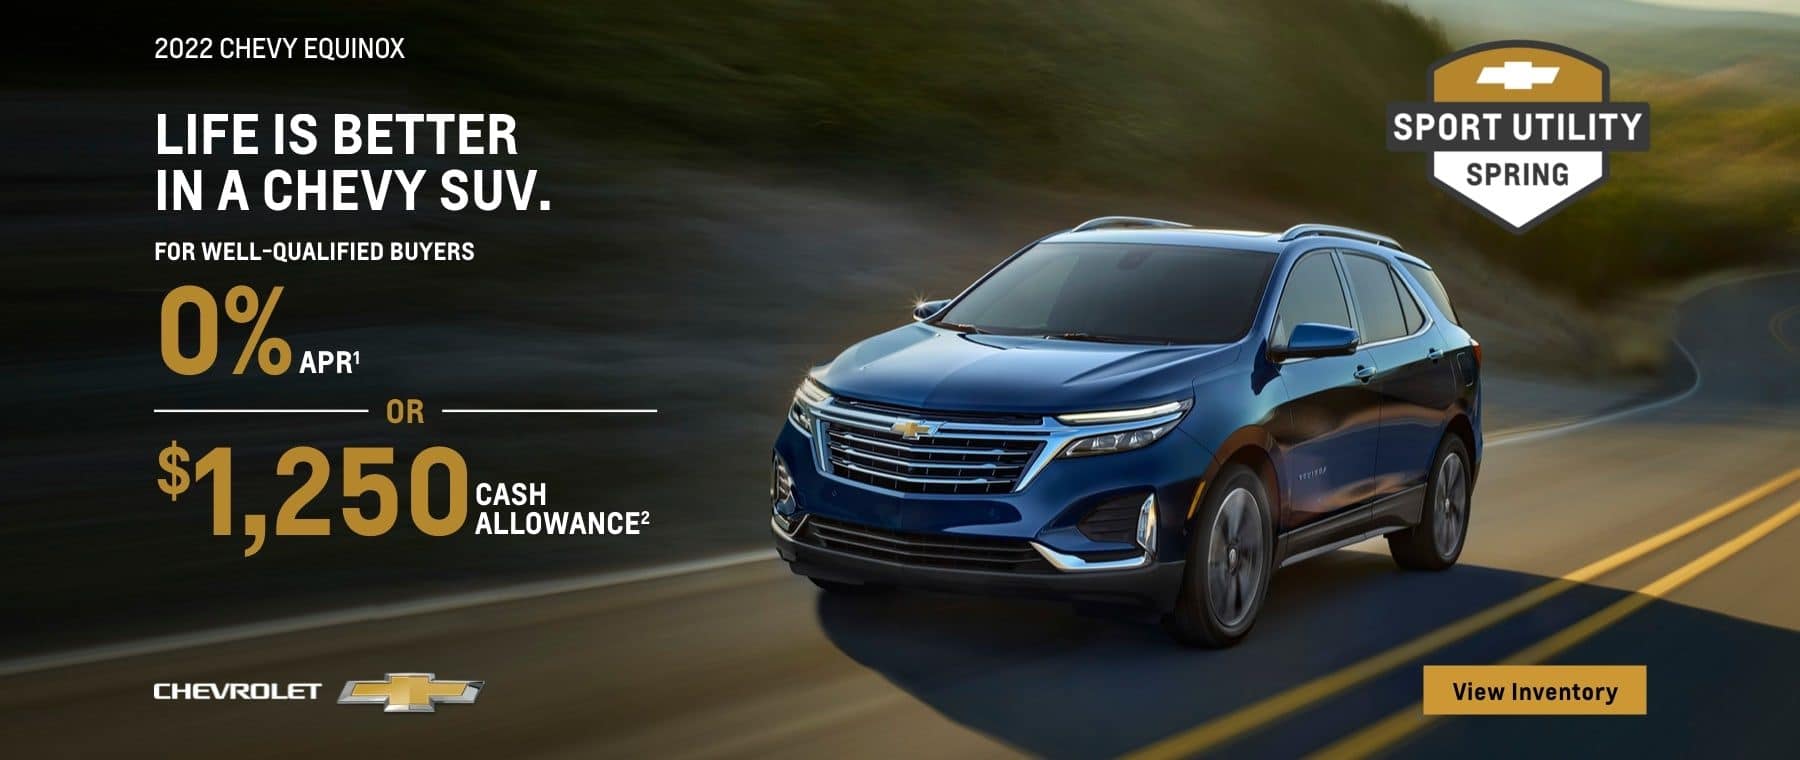 2022 Chevy Equinox. Life is better in a Chevy SUV. For very well-qualified buyers 0% APR. Or, $1250 cash allowance.